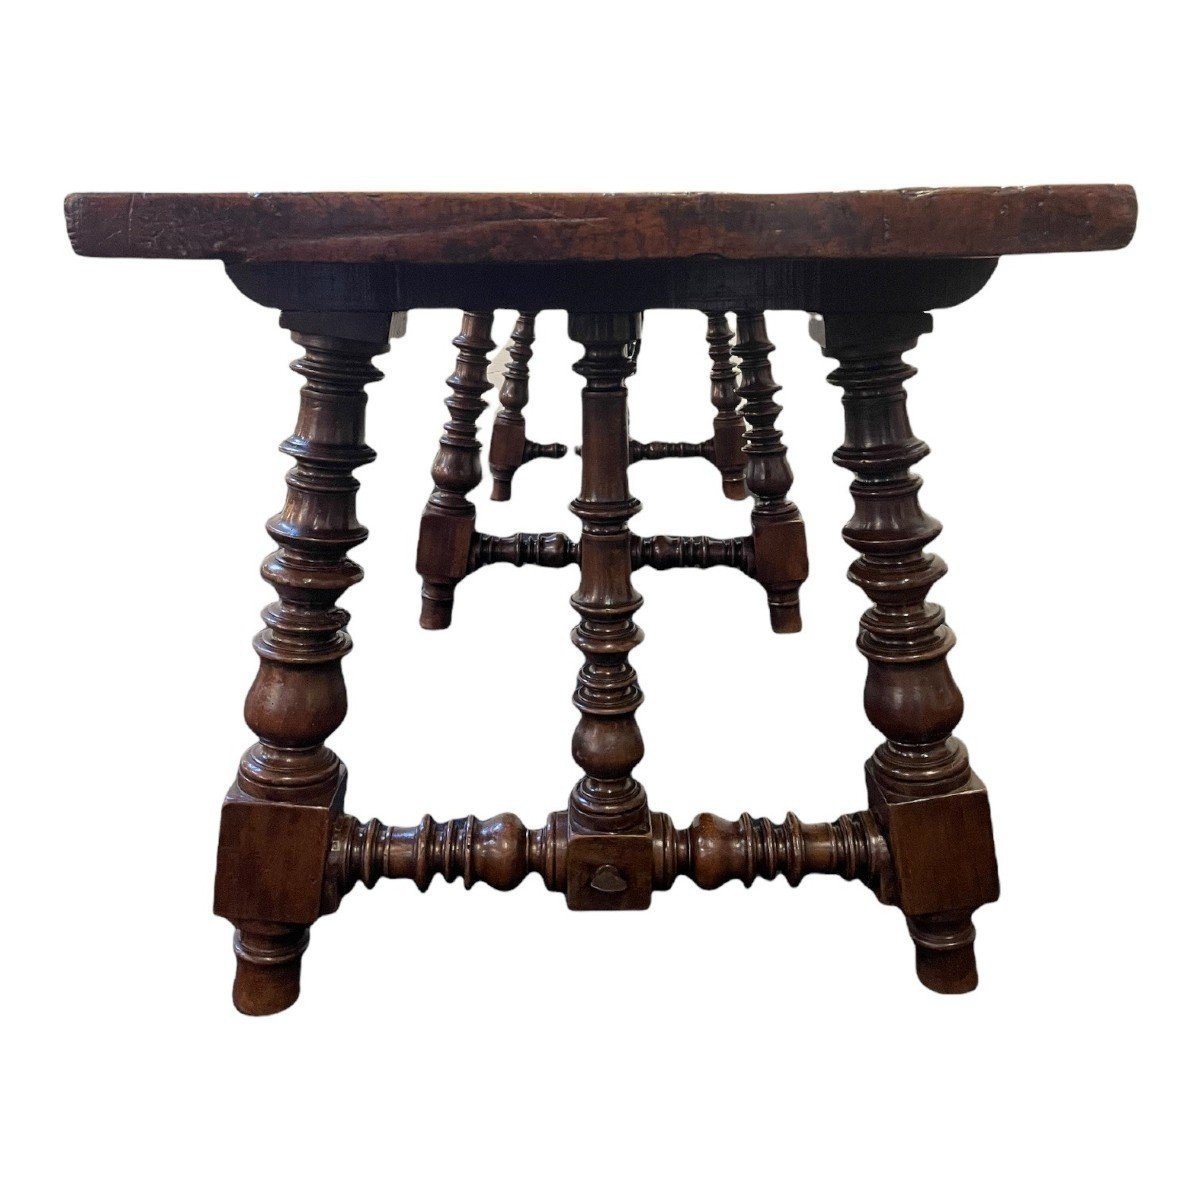 Large Spanish Table With 6 Legs In Walnut 17thc. (266 Cm).-photo-3